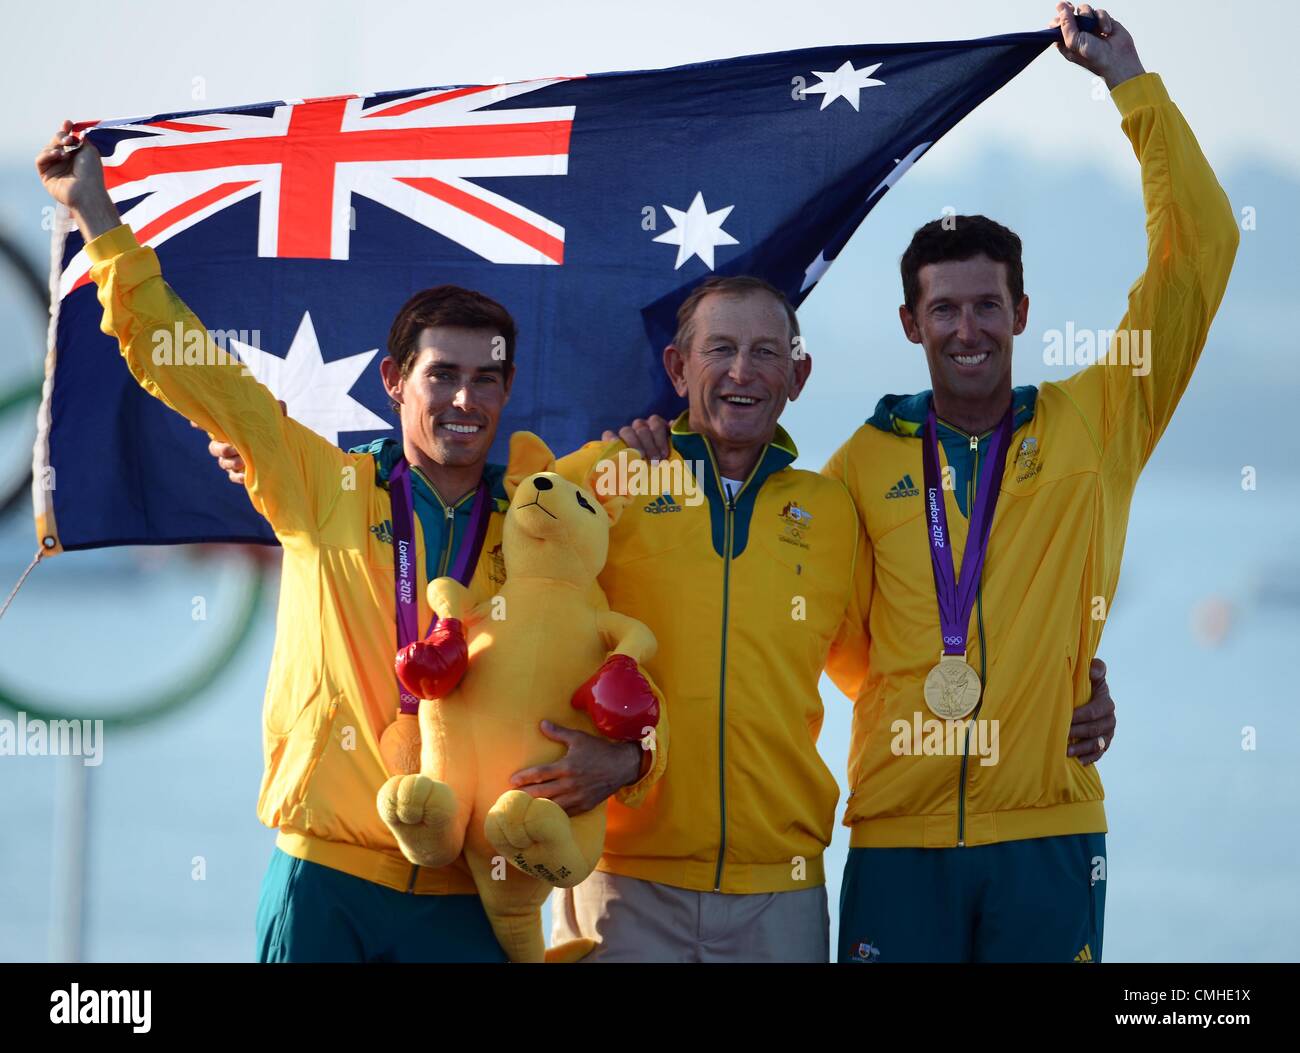 10th Aug 2012. London 2012 Olympics, Sailing at the Weymouth & Portland Venue, Dorset, Britain, UK.  August 10th, 2012 Men's 470 medal race gold medal winners, Mathew Belcher and Malcolm Page of Australia PICTURE: DORSET MEDIA SERVICE Stock Photo